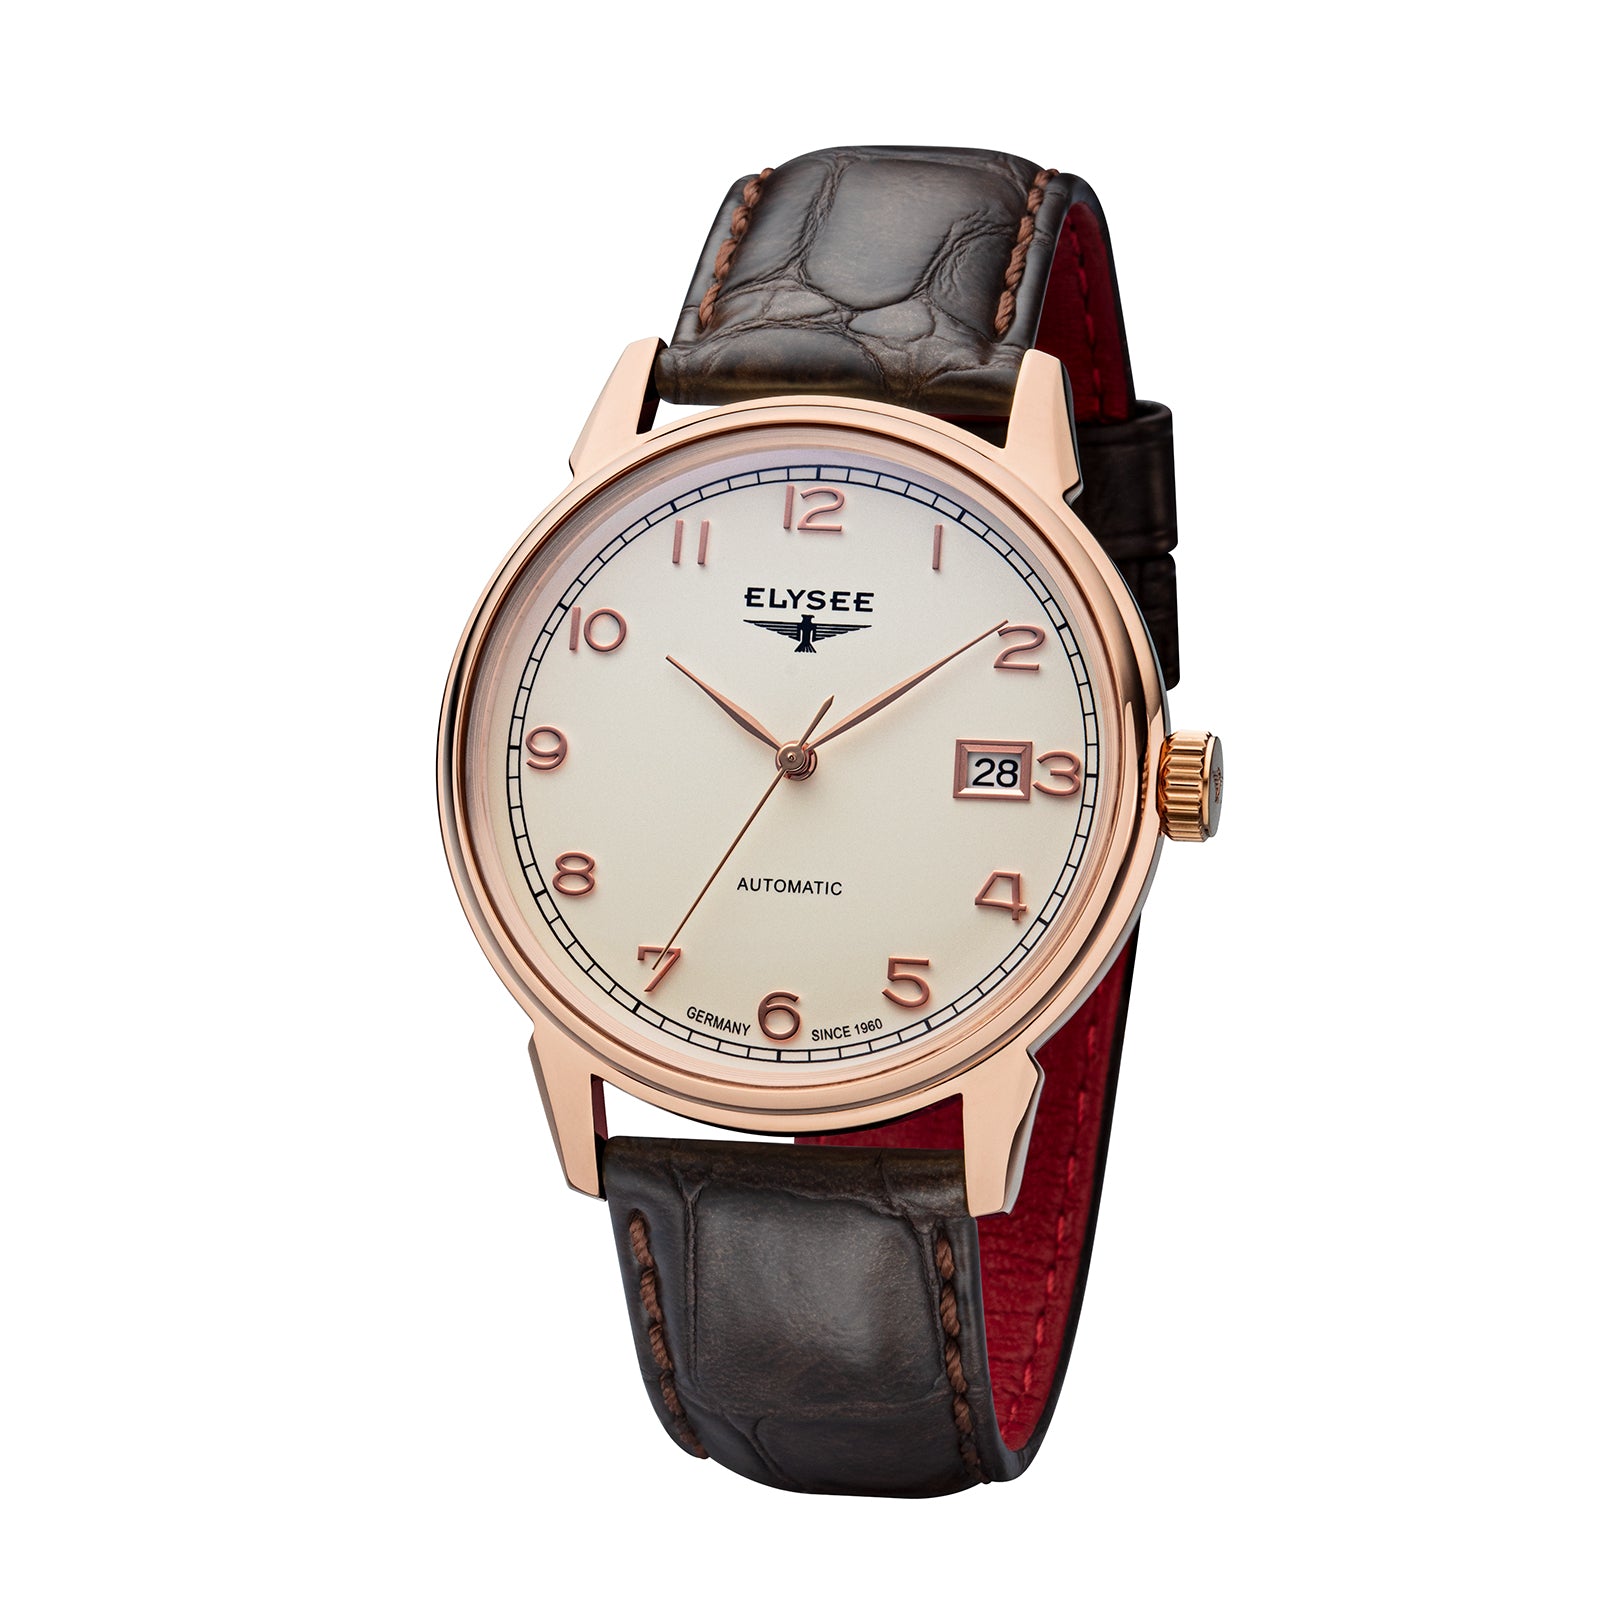 Master – Watches 80560 watch Elysee - Elysee Uhren - Automatic Vintage - automatic